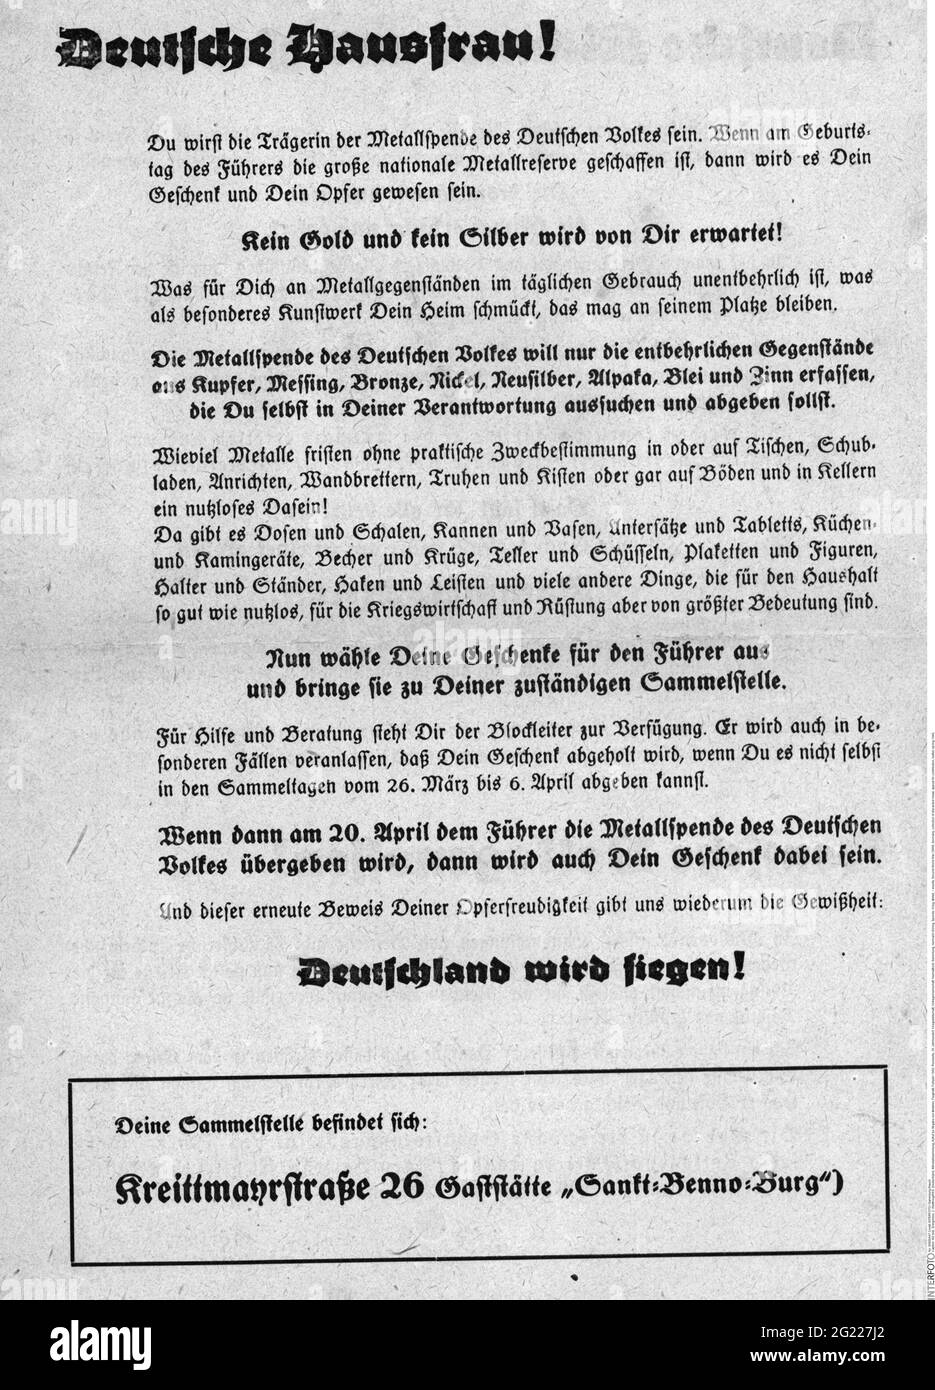 events, Second World War / WWII, Germany, collection of discarded metal, appeal for contribution, leaflet, spring 1940, EDITORIAL-USE-ONLY Stock Photo